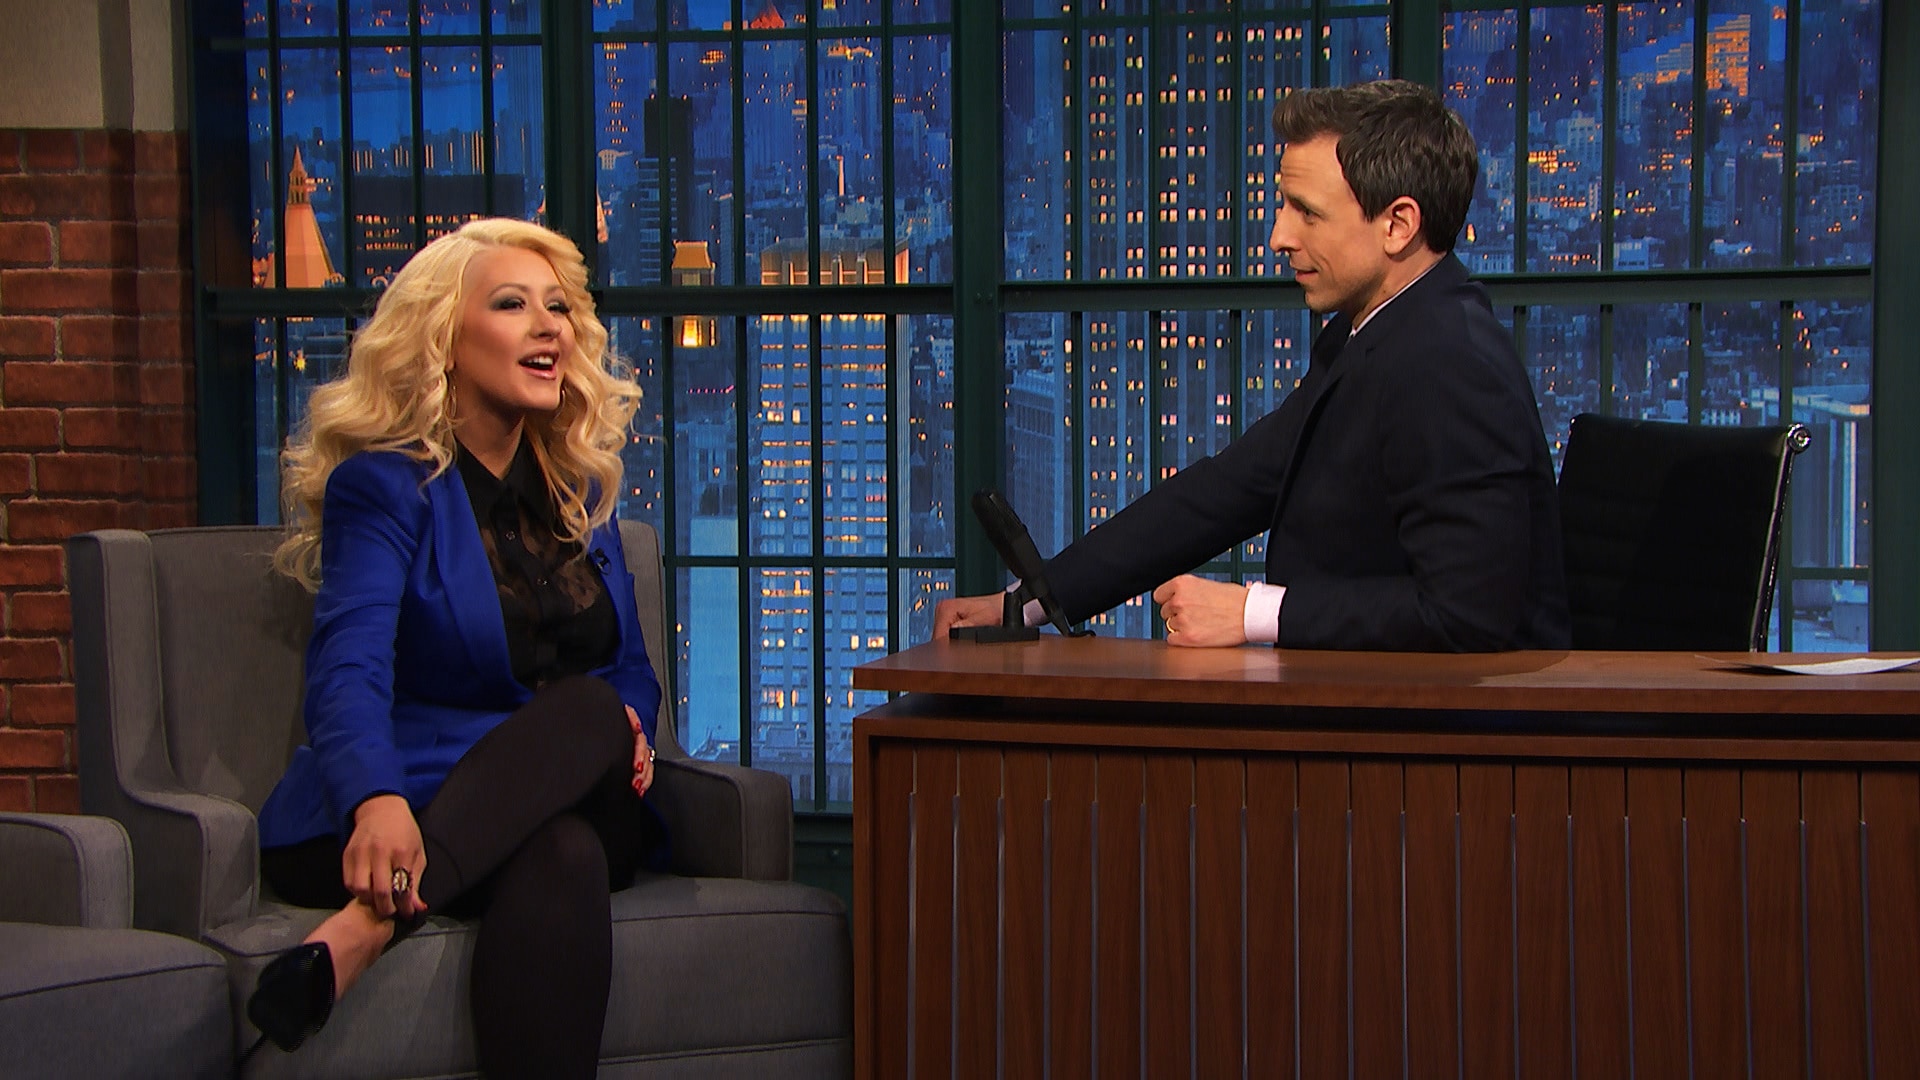 Christina Aguilera in Vivienne Westwood on “Late Night with Seth